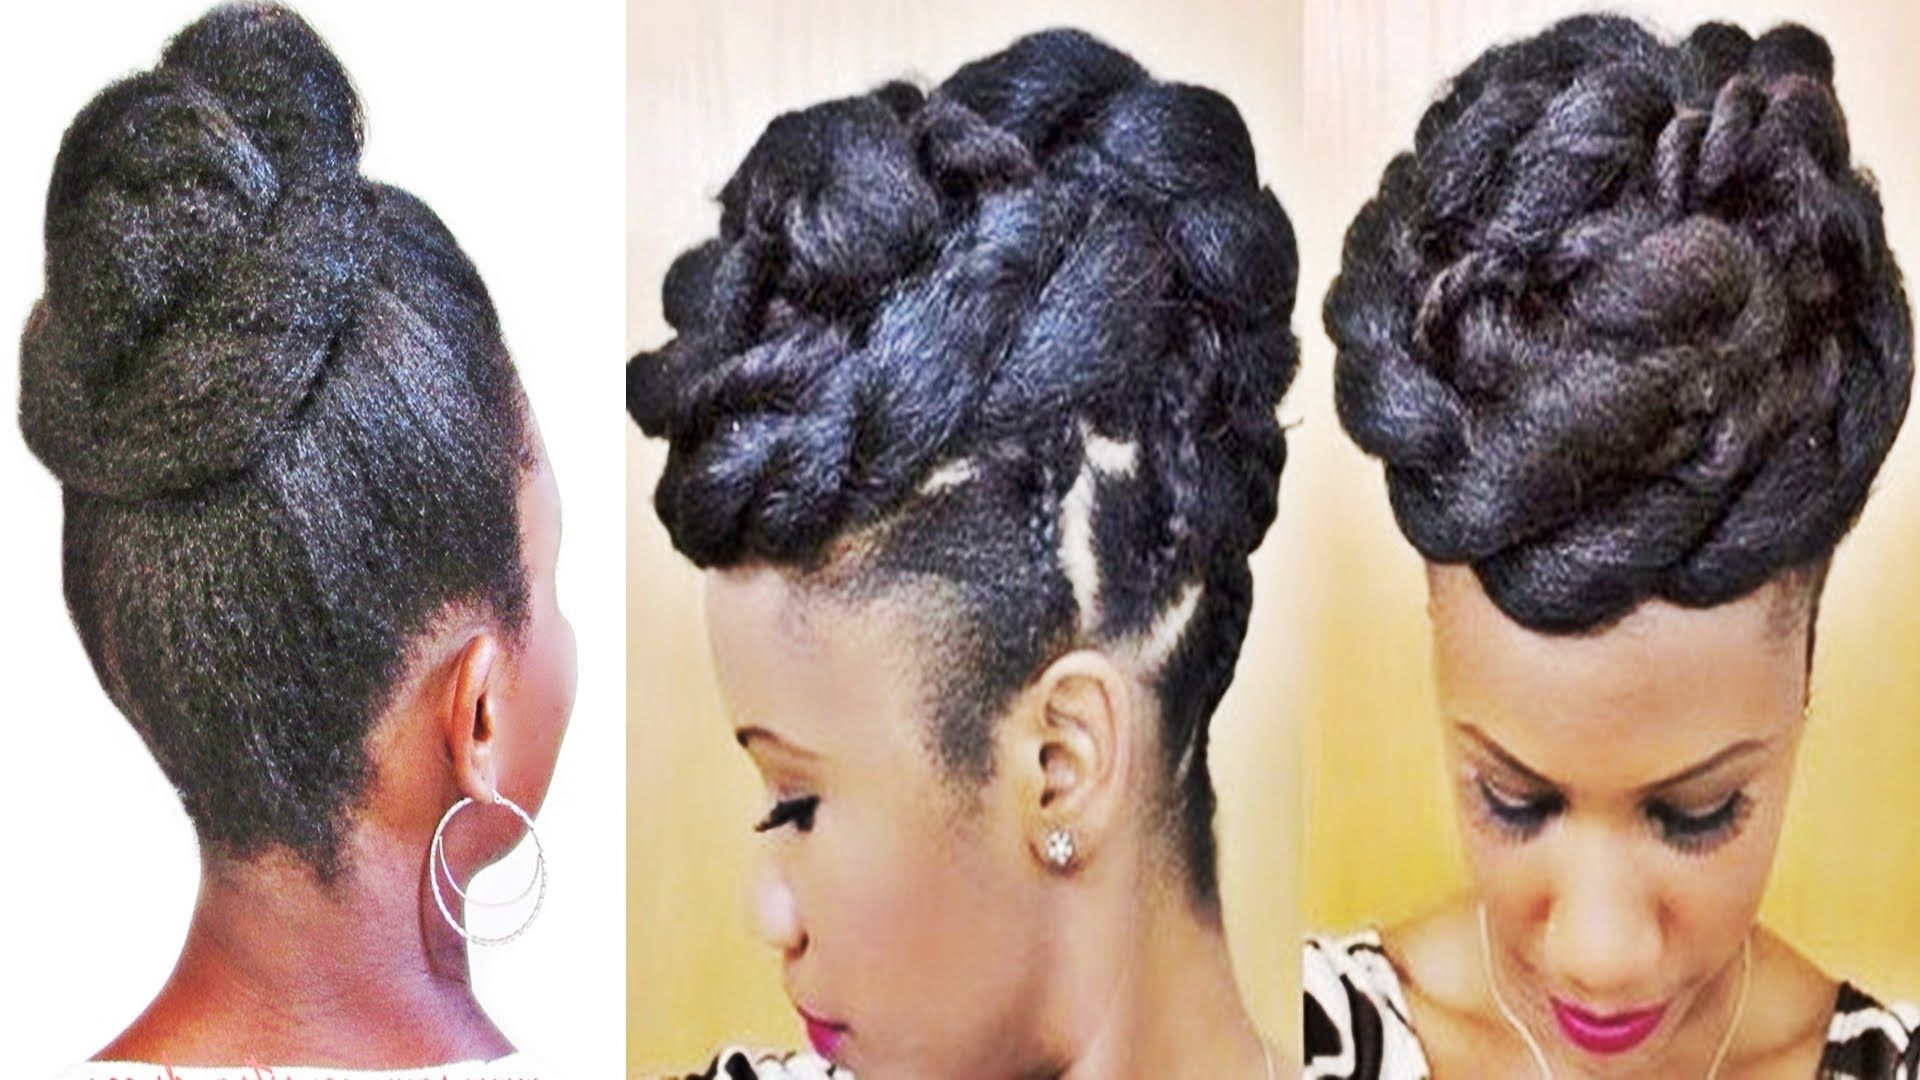 Braids And Twists Updo Hairstyle For Black Women – Youtube Throughout Cornrow Updo Hairstyles For Black Women (View 7 of 15)